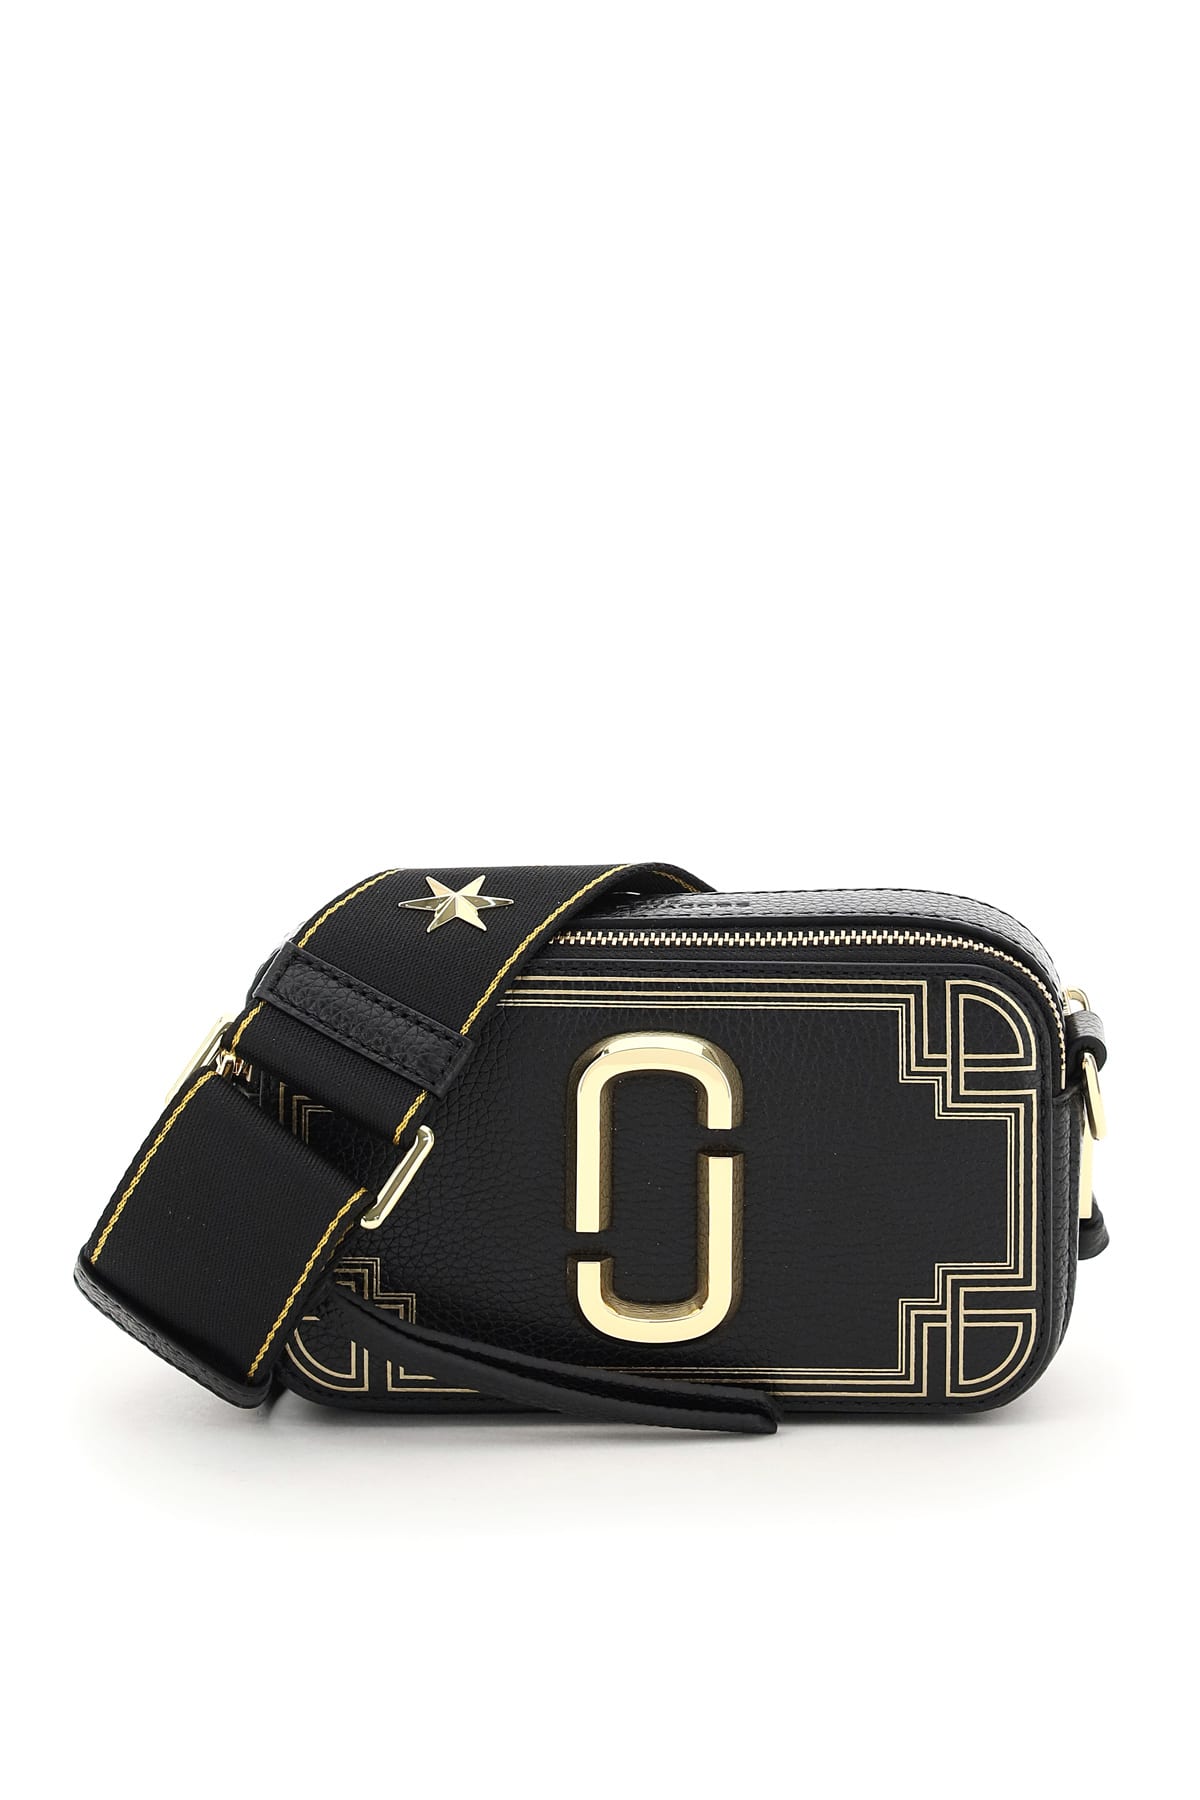 The Snapshot Gilded Leather Crossbody In Black